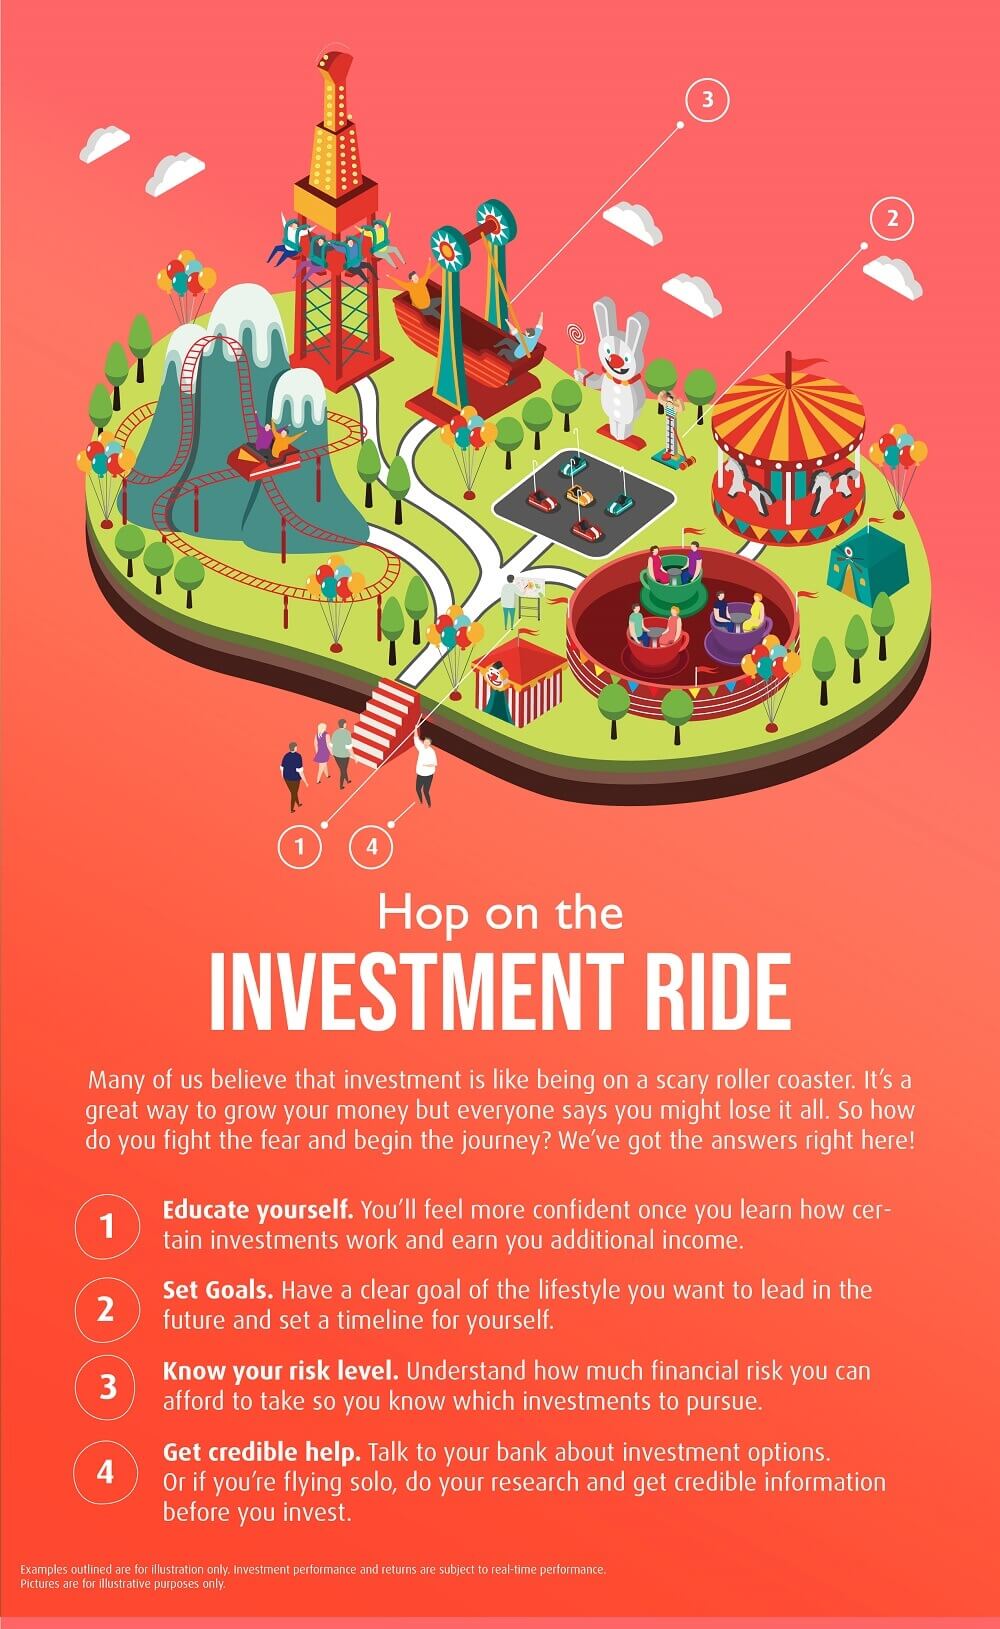 Hop on the Investment Ride